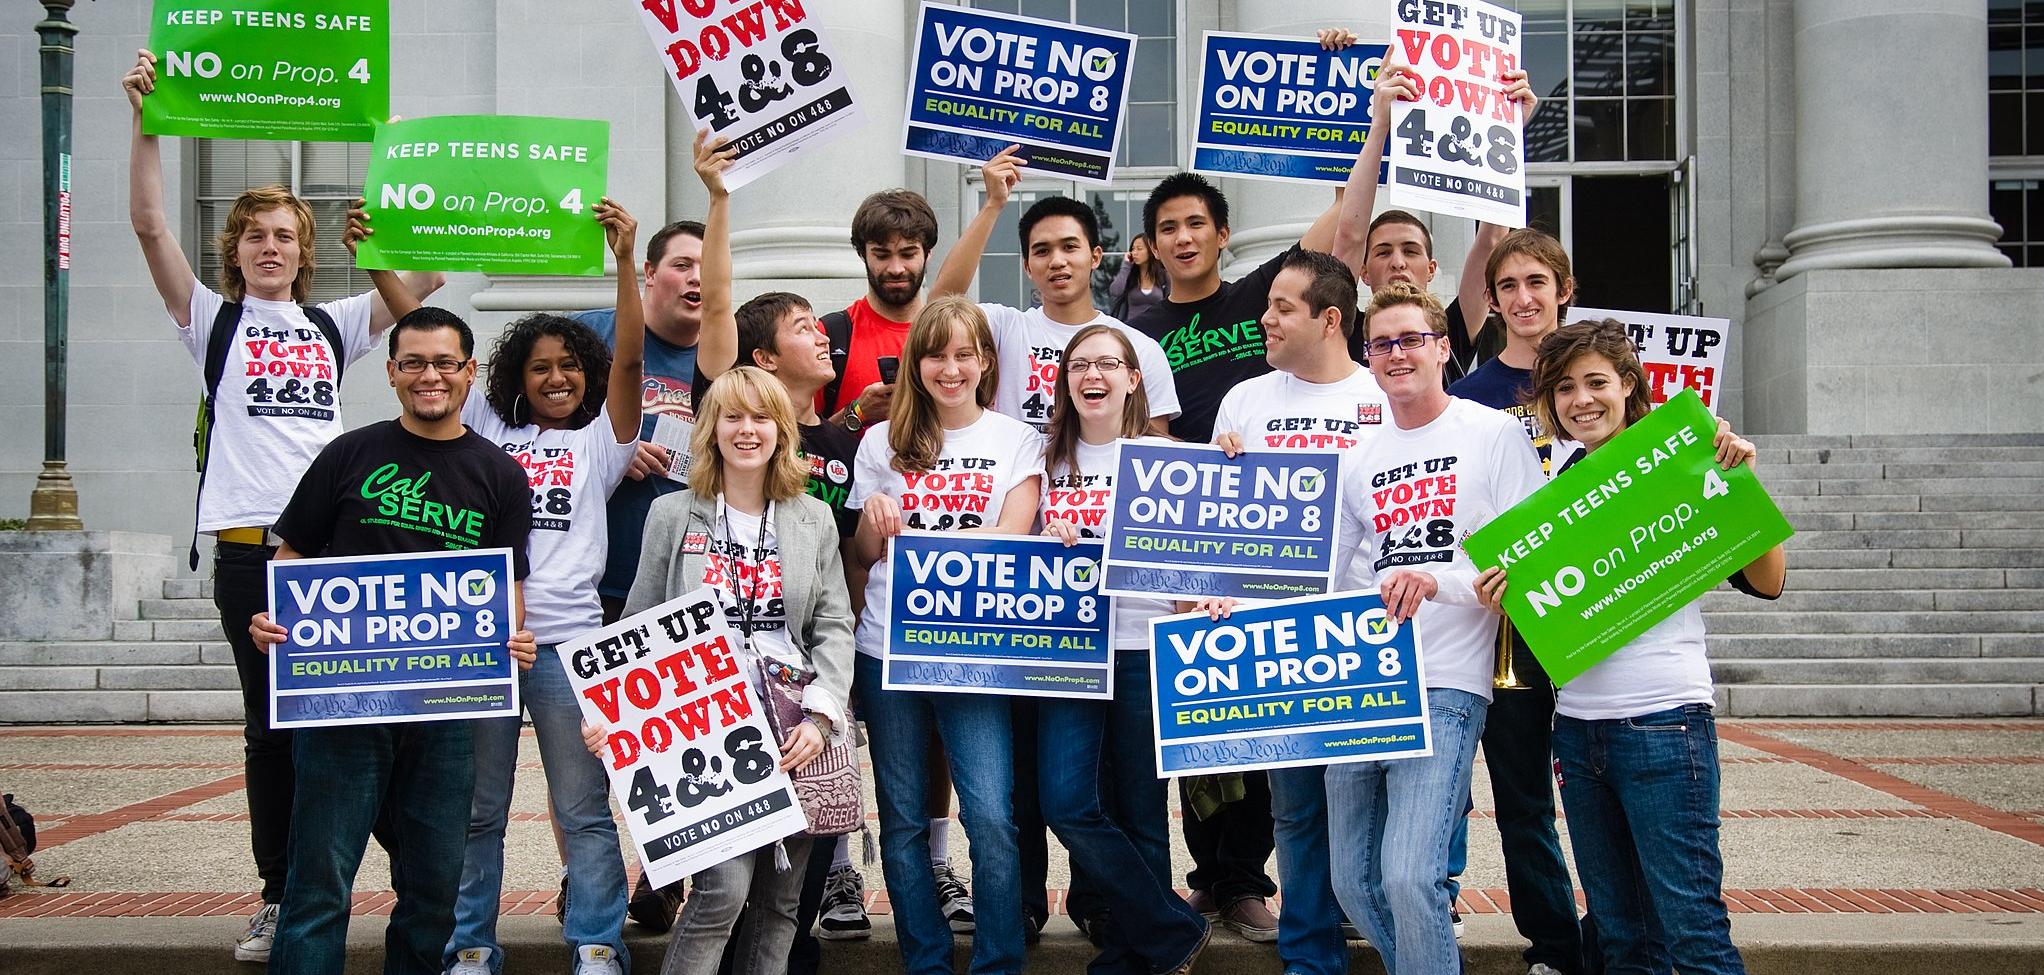 A group of people holding signs that read "Vote No on Prop 8"